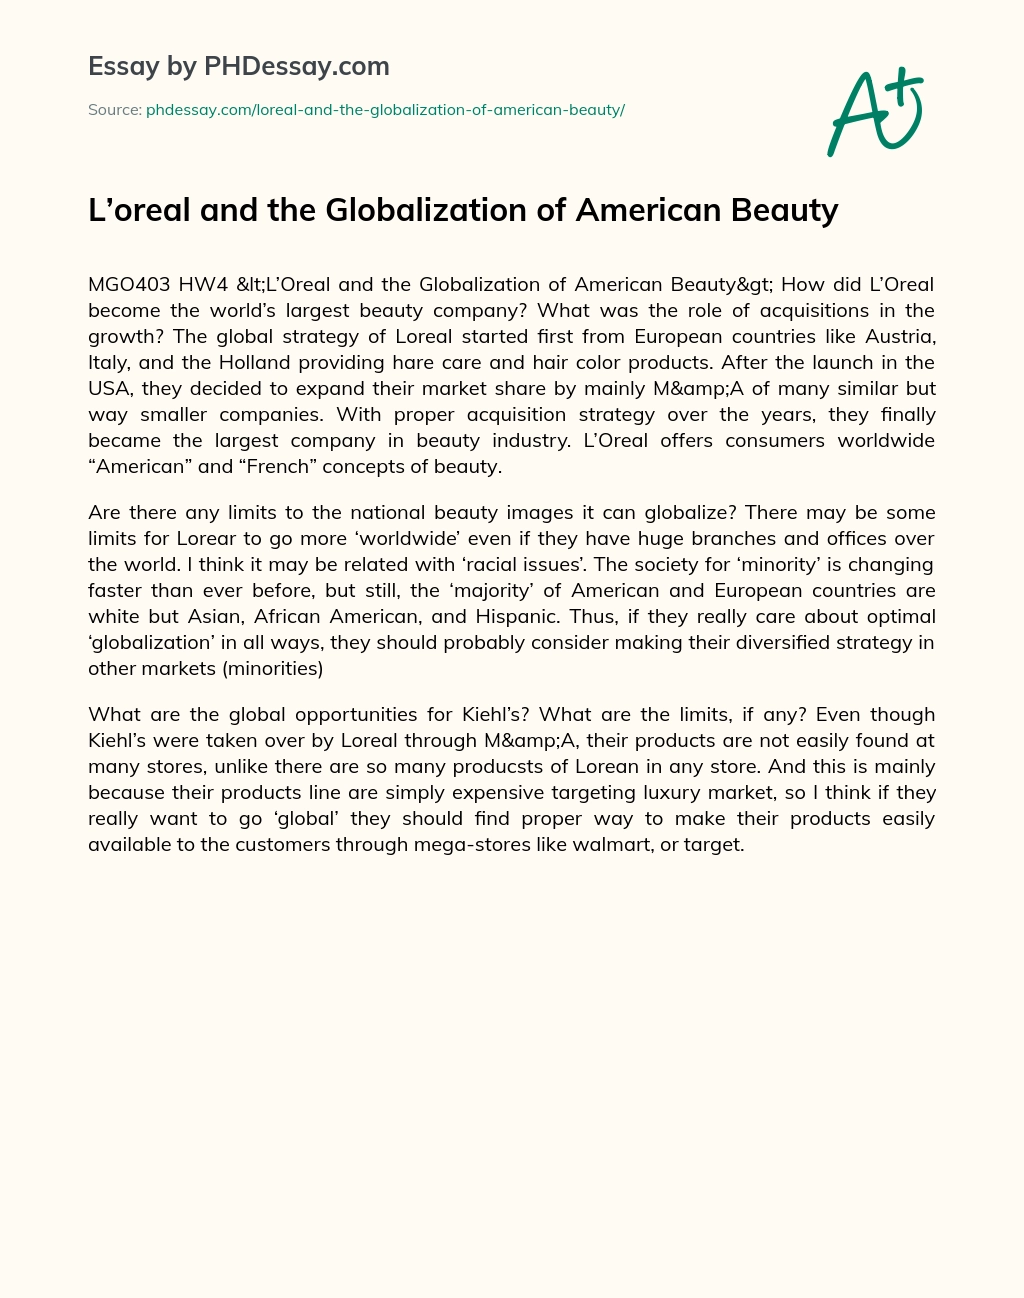 L’oreal and the Globalization of American Beauty essay